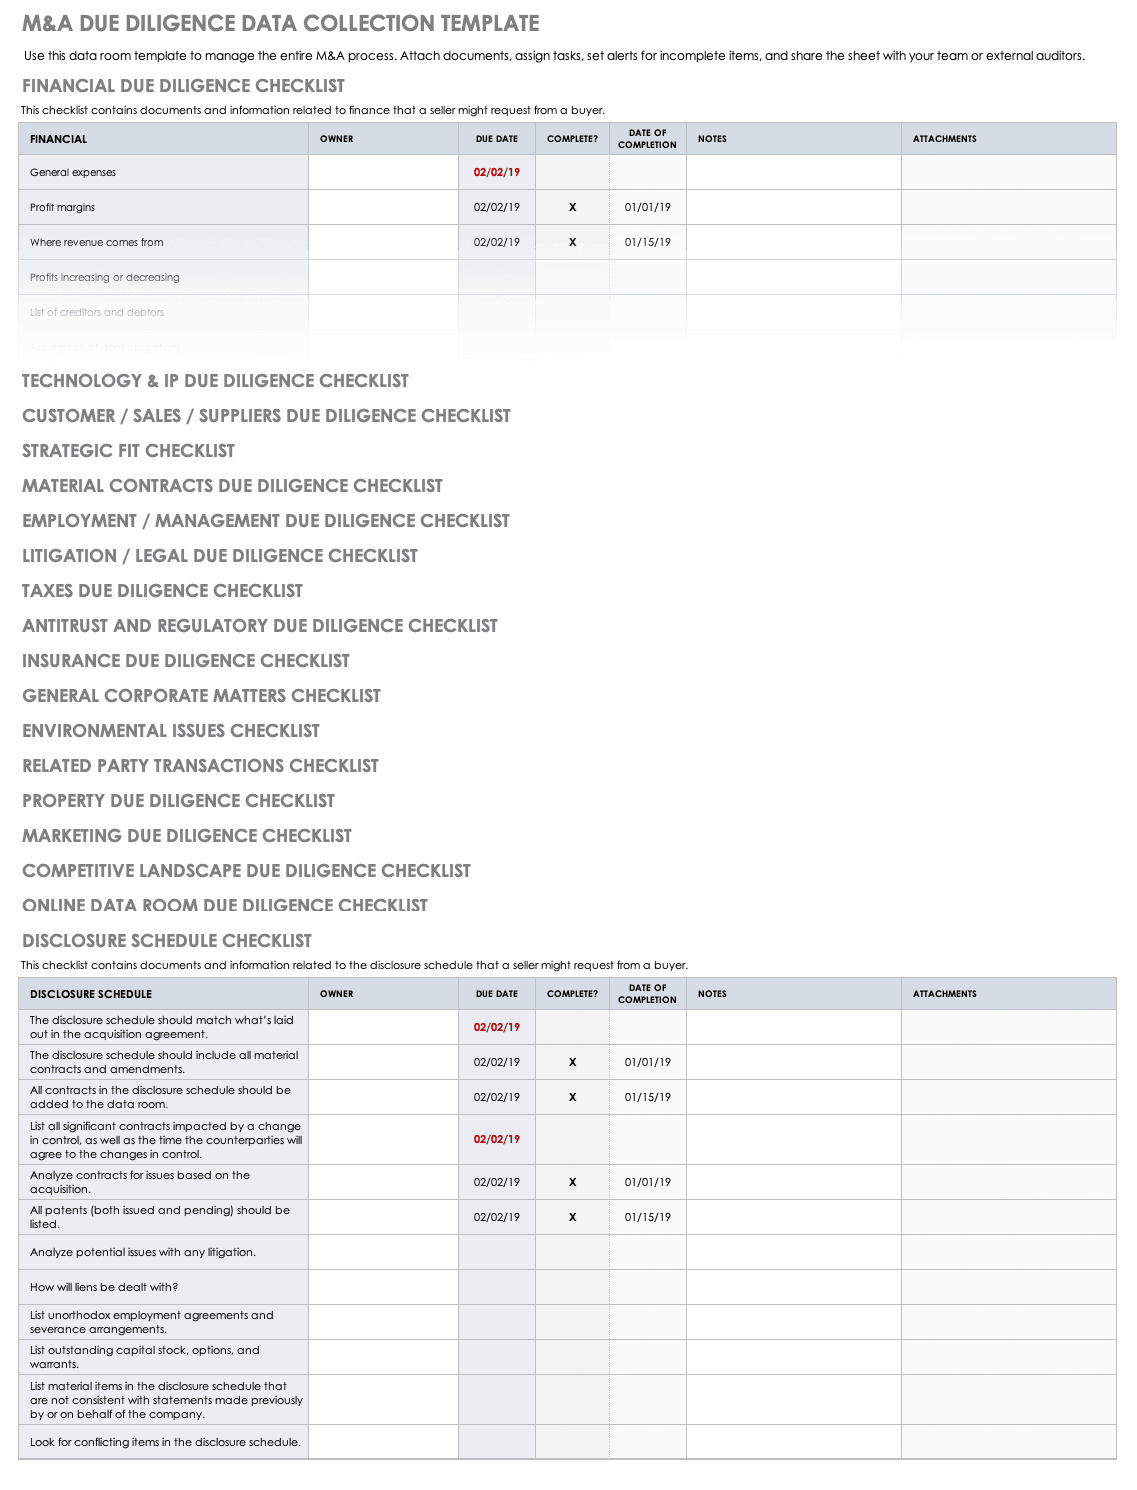 Free Due Diligence Templates And Checklists | Smartsheet Within Vendor Due Diligence Report Template